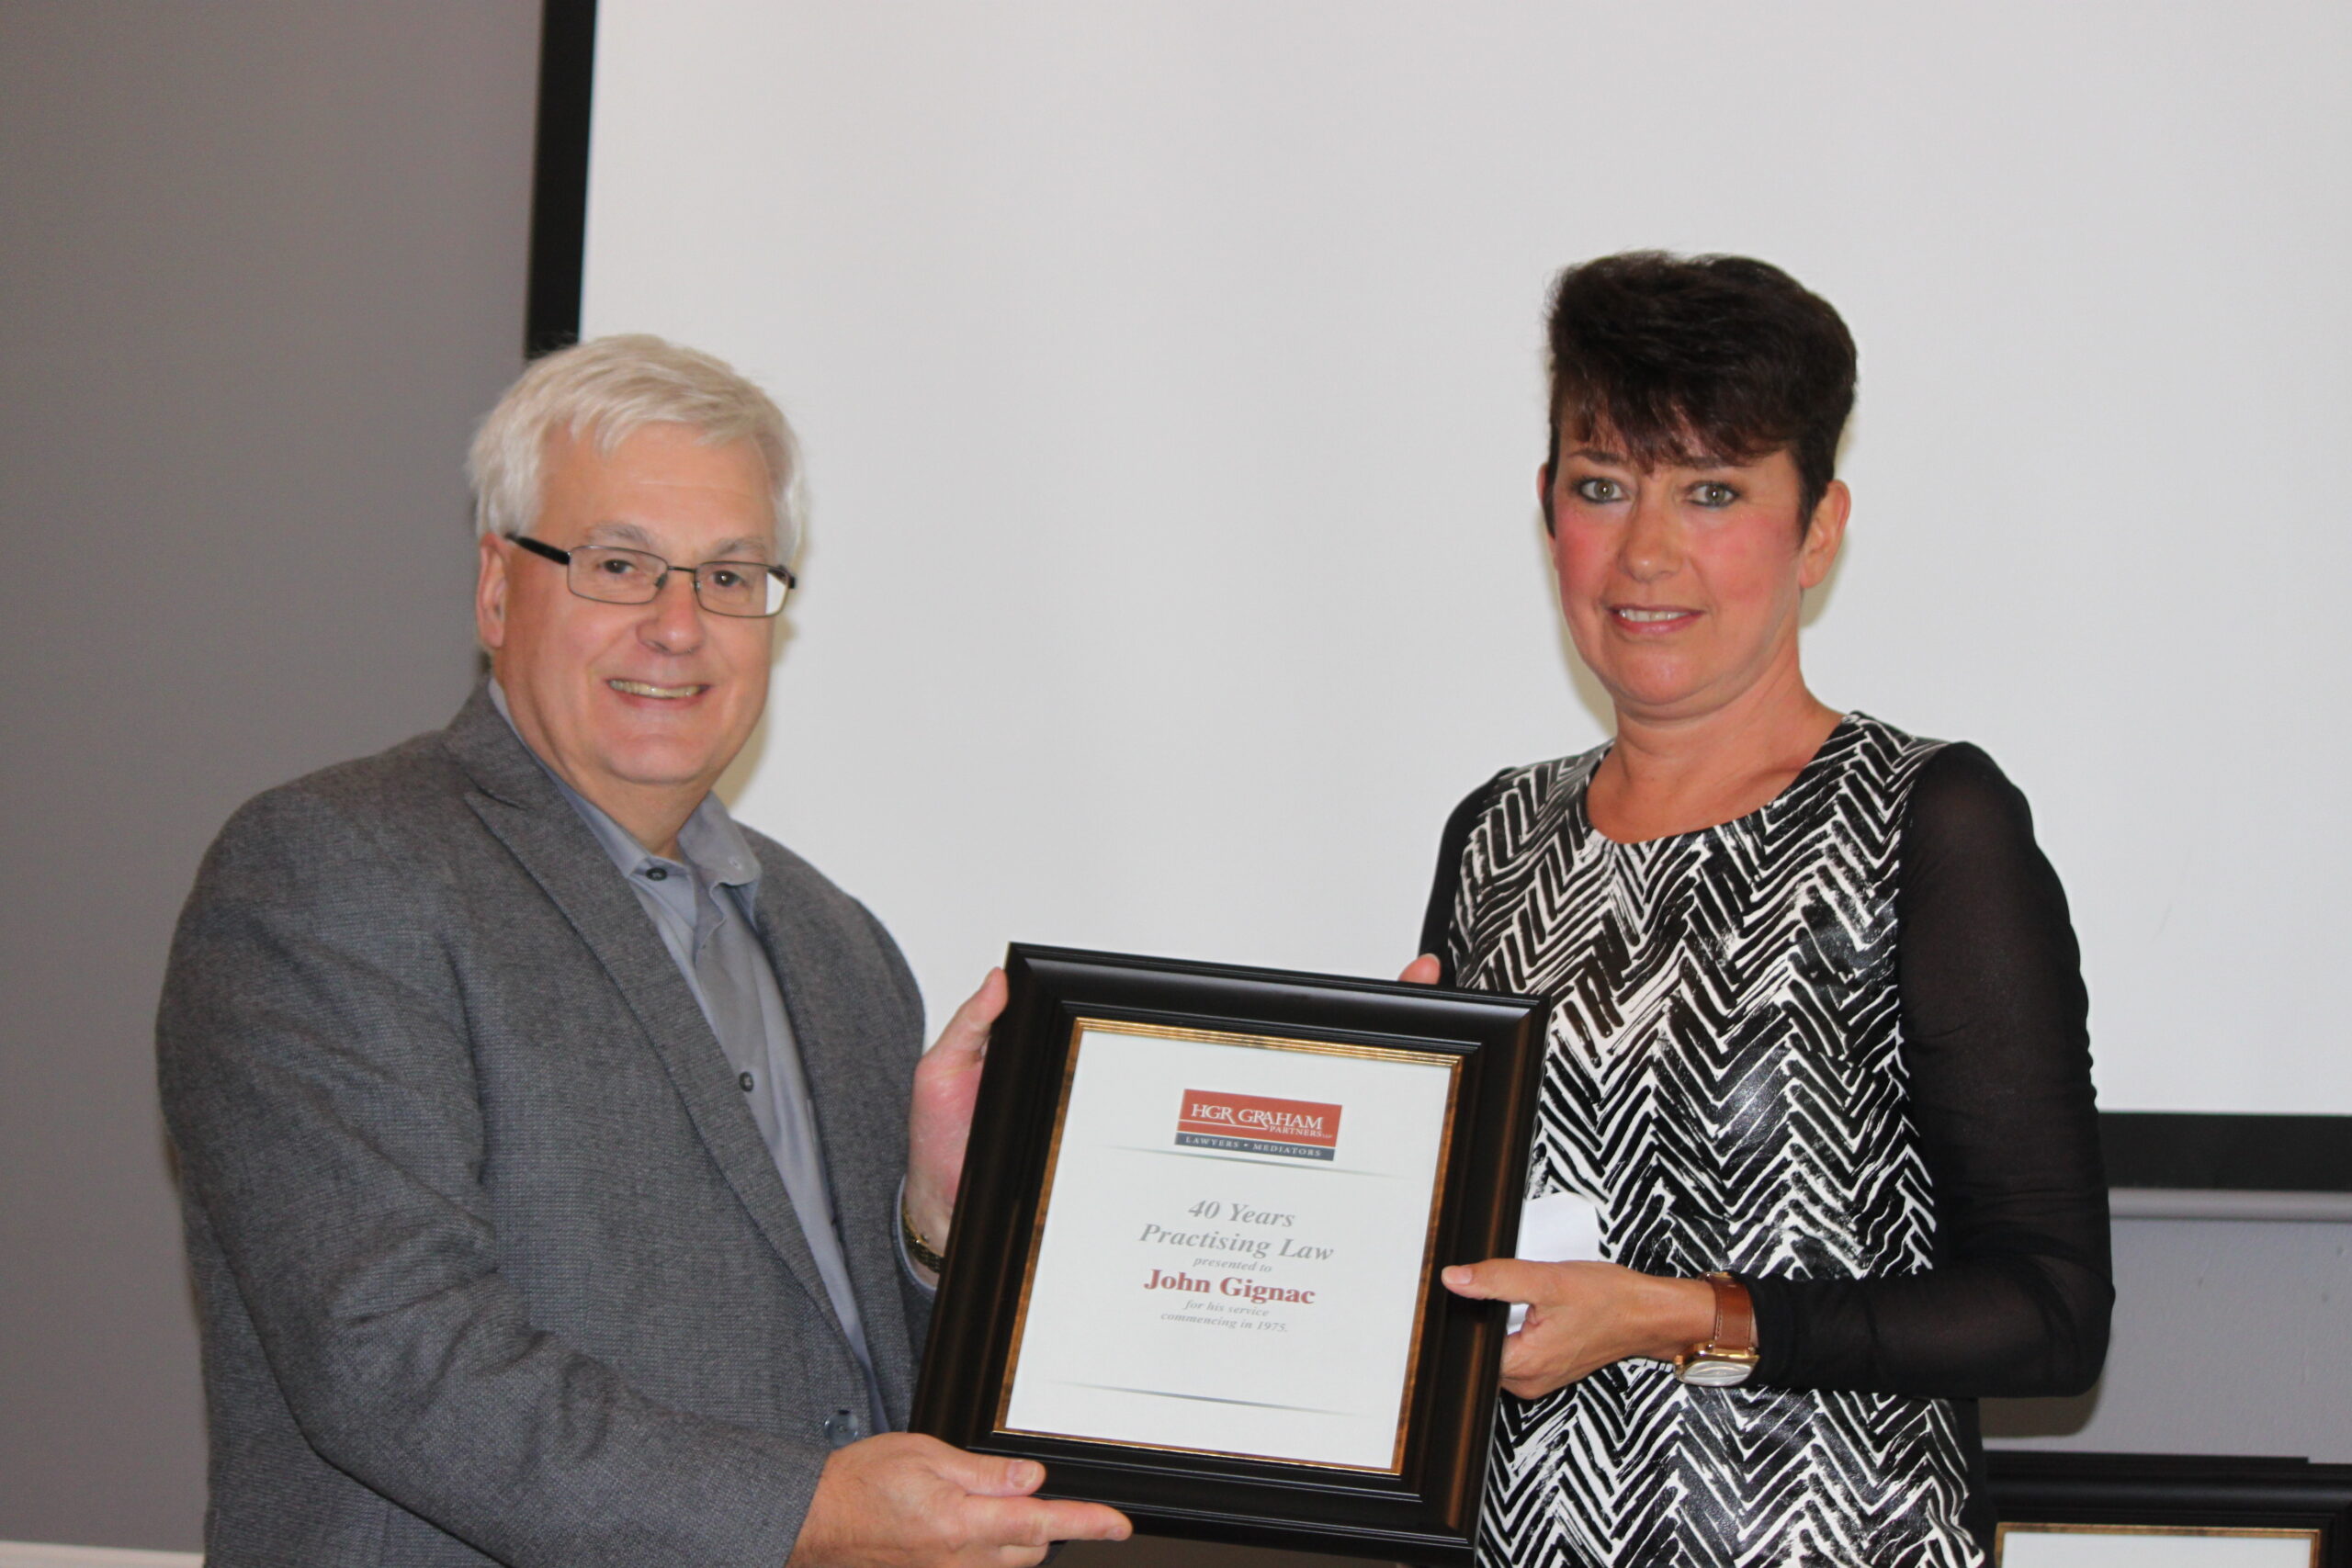 John Gignac accepting his award from Christine Manners